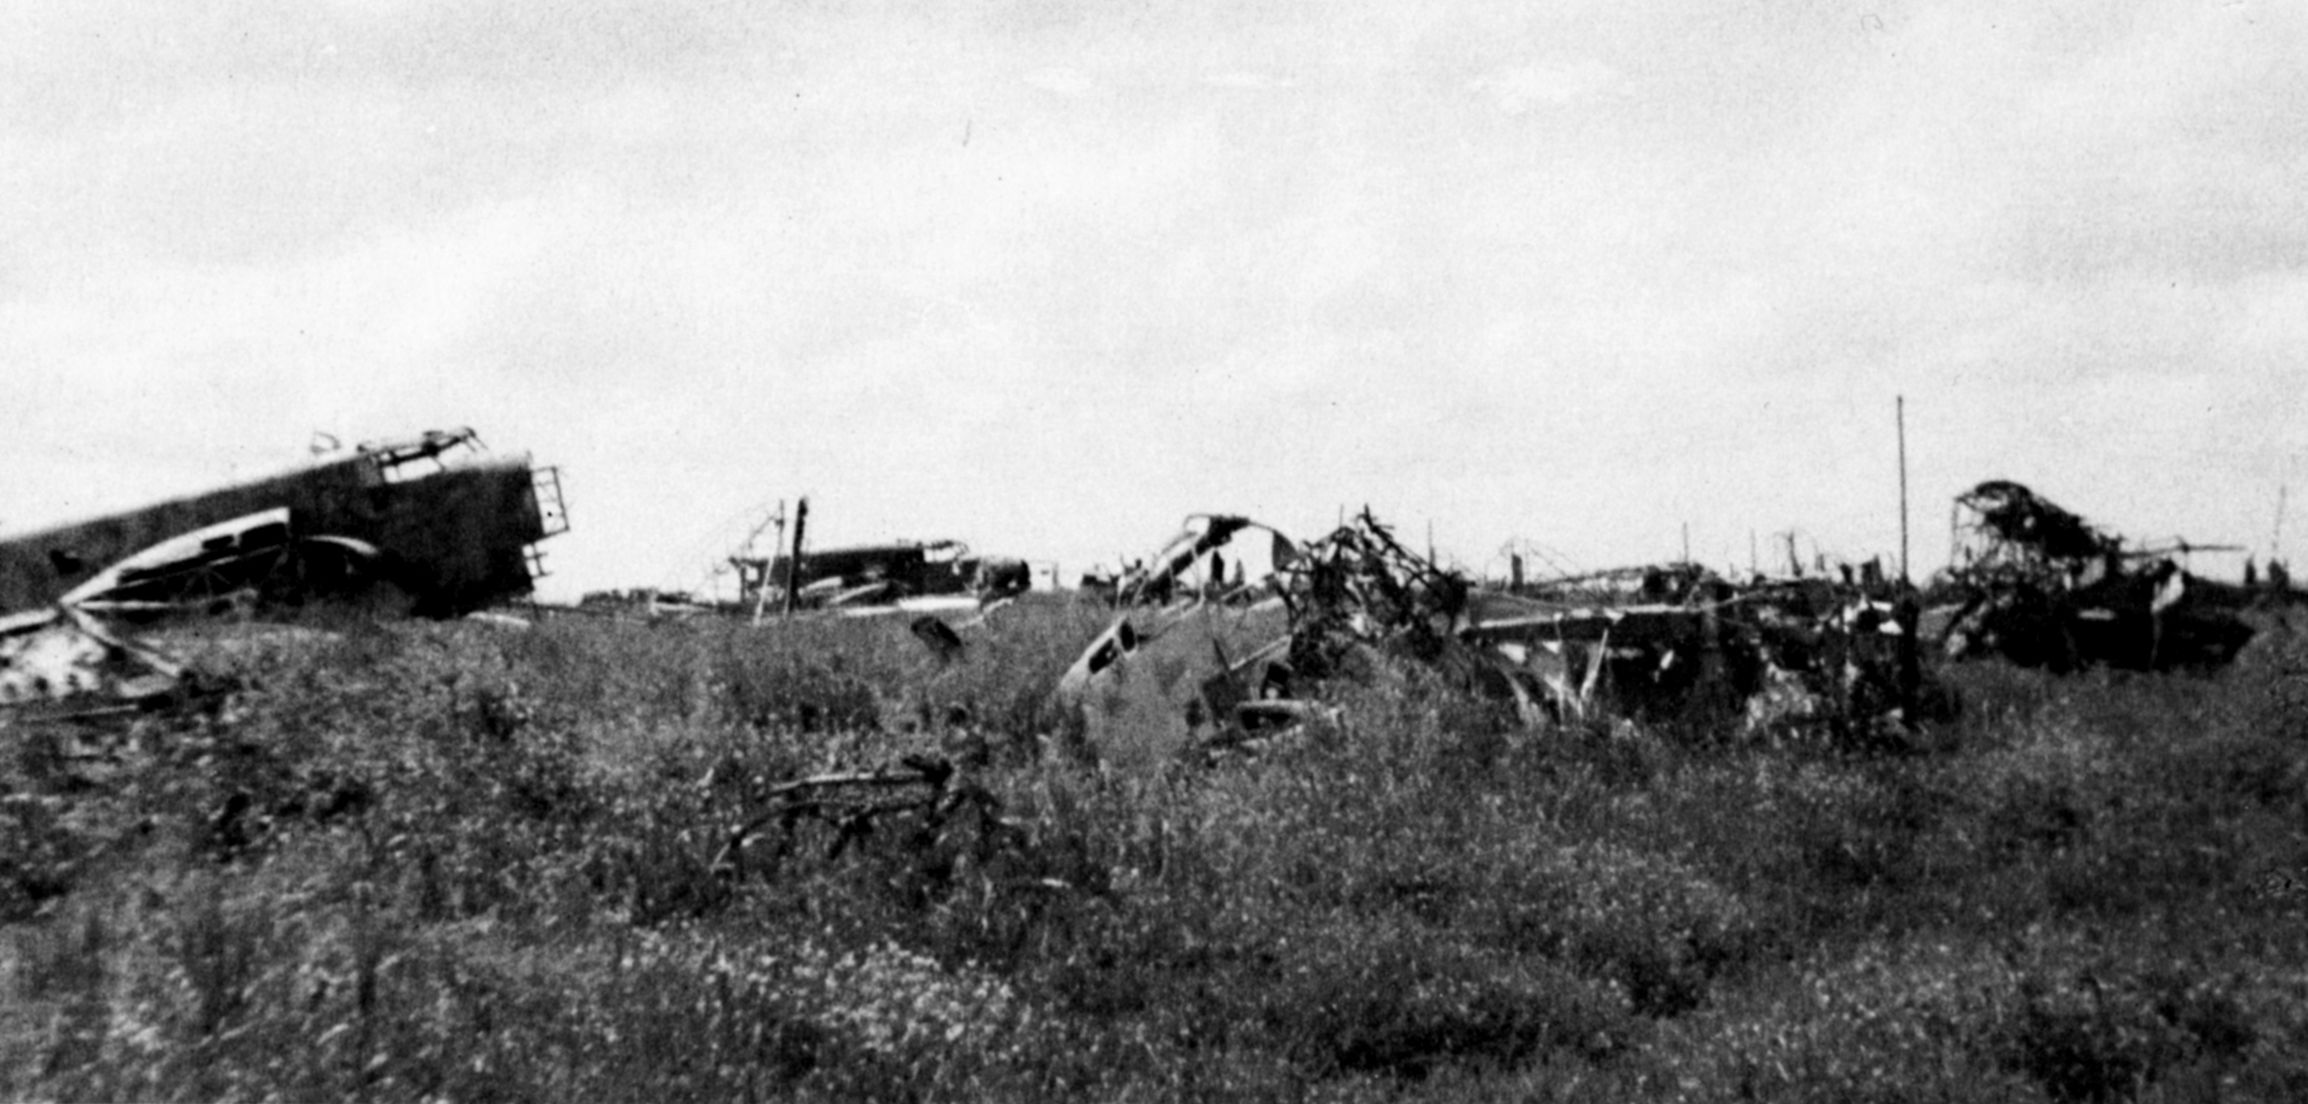 In the wake of a raid by the Long Range Desert Group (LRDG), destroyed Italian aircraft litter the airfield at Barce, Libya. An attack by the LRDG on September 13, 1942, left 30 Italian planes destroyed and impeded the delivery of supplies to Axis forces. (National Archives)